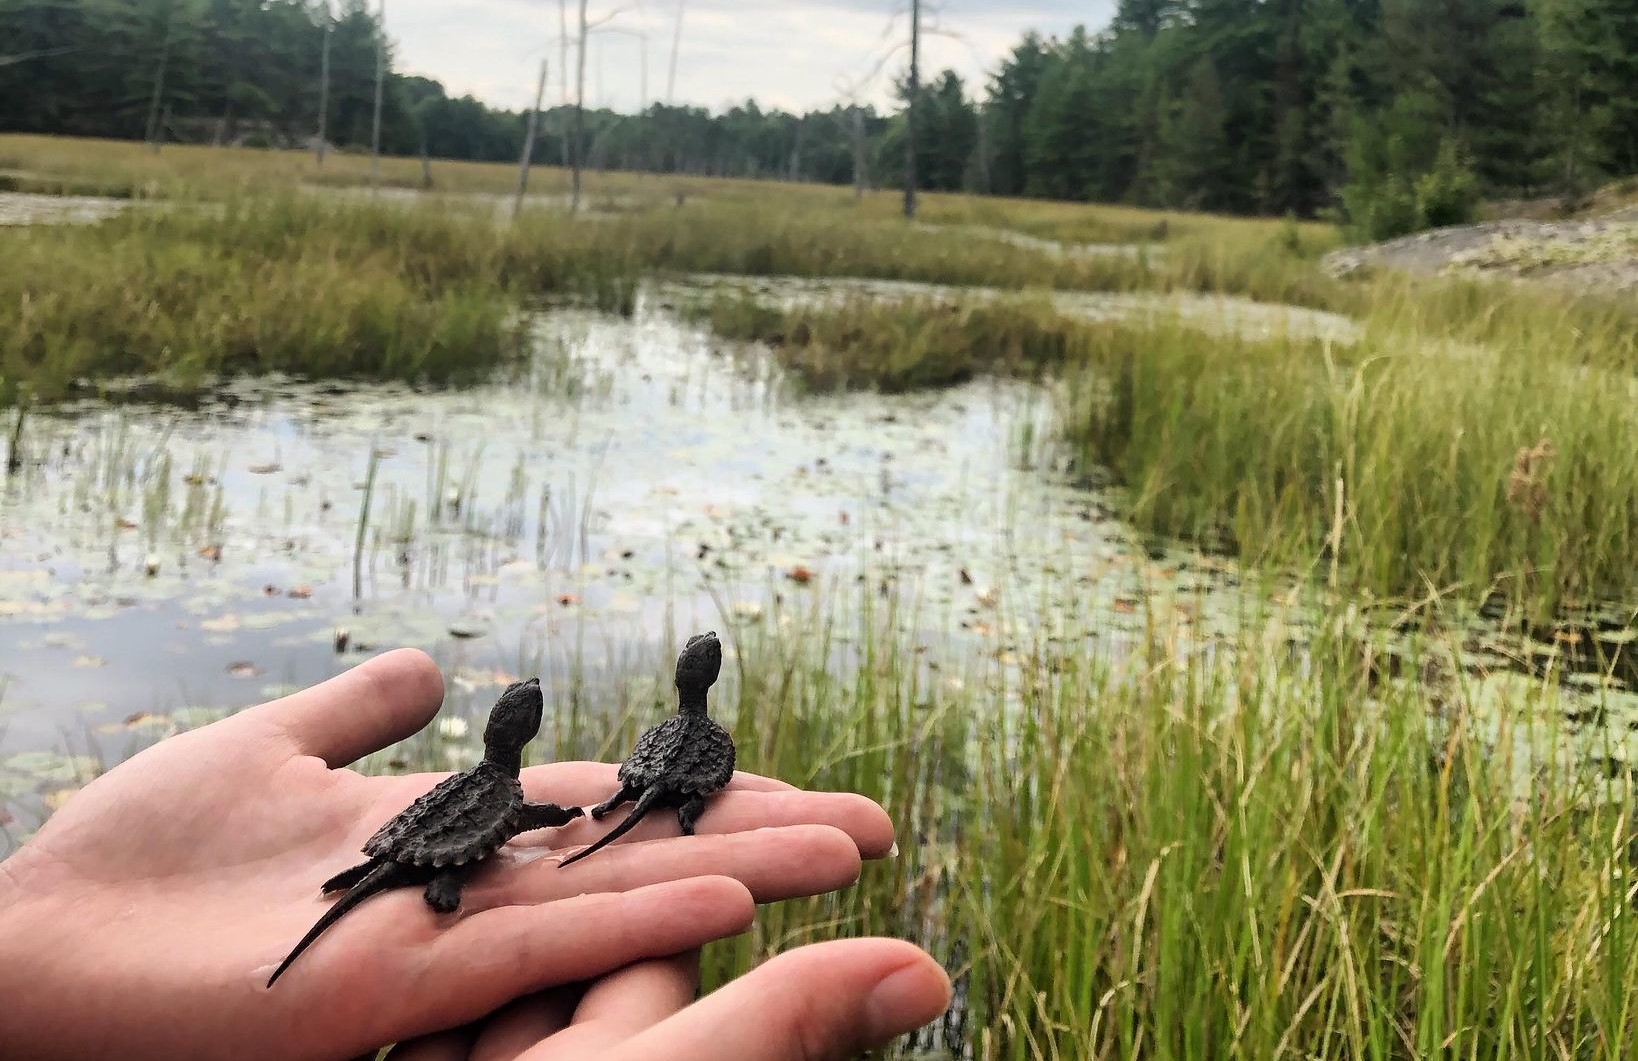 Image of two baby turtles sitting in someone’s hand while looking up at the wetlands near them 